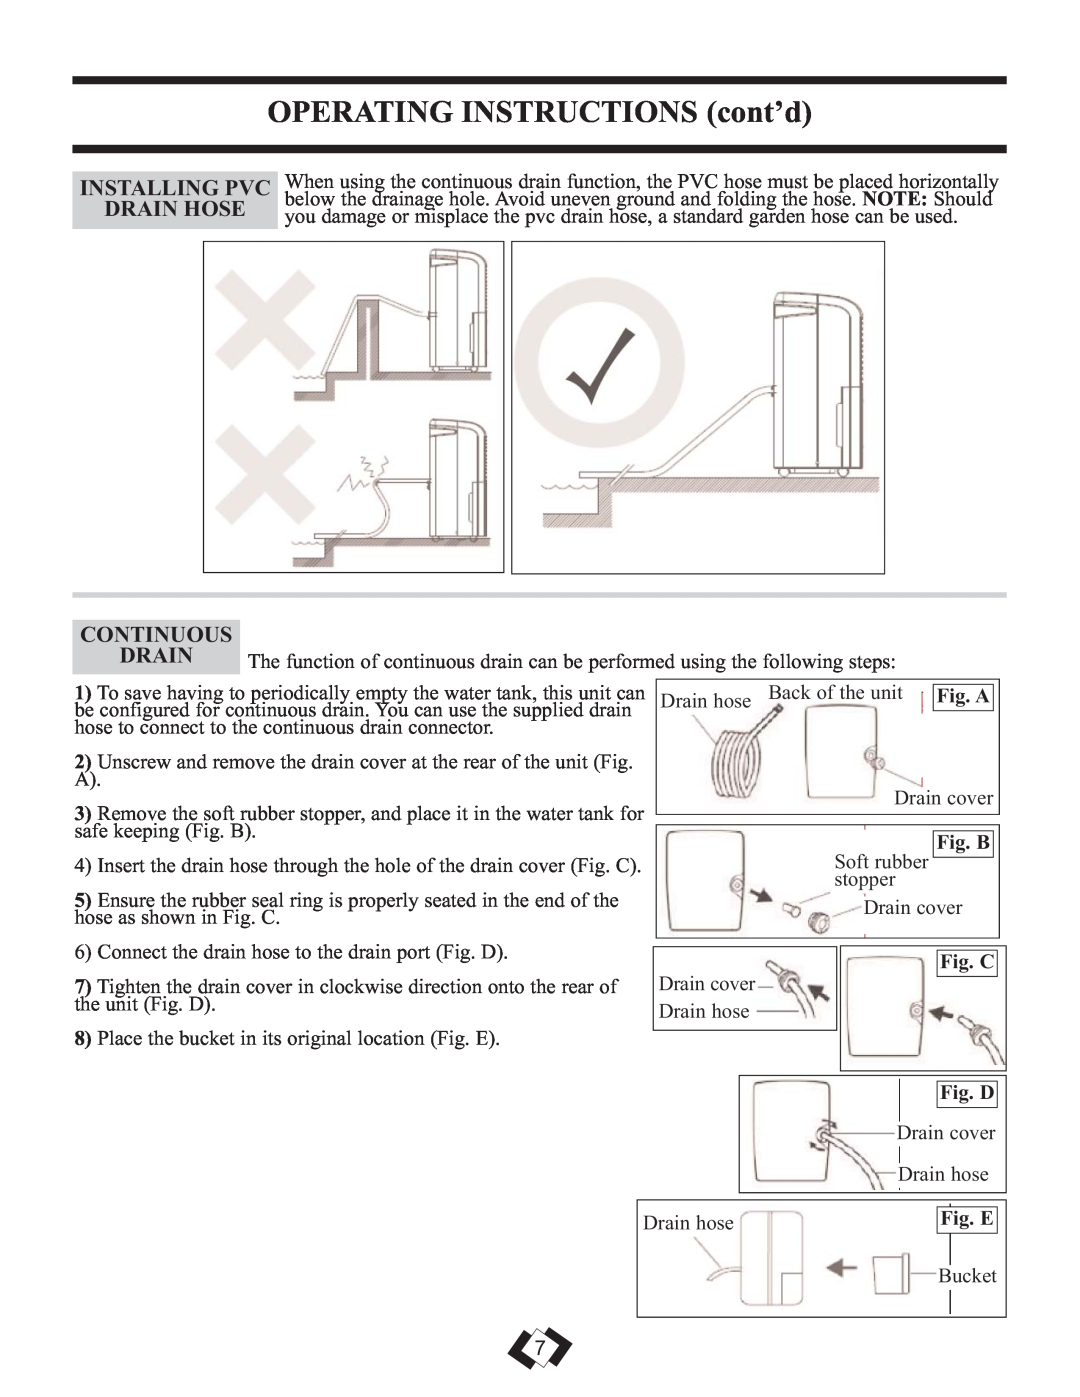 Danby 6009REE, 7009REE operating instructions Installing Pvc, Drain Hose, Continuous, Fig. A, Fig. B, Fig. C, Fig. D, Fig. E 